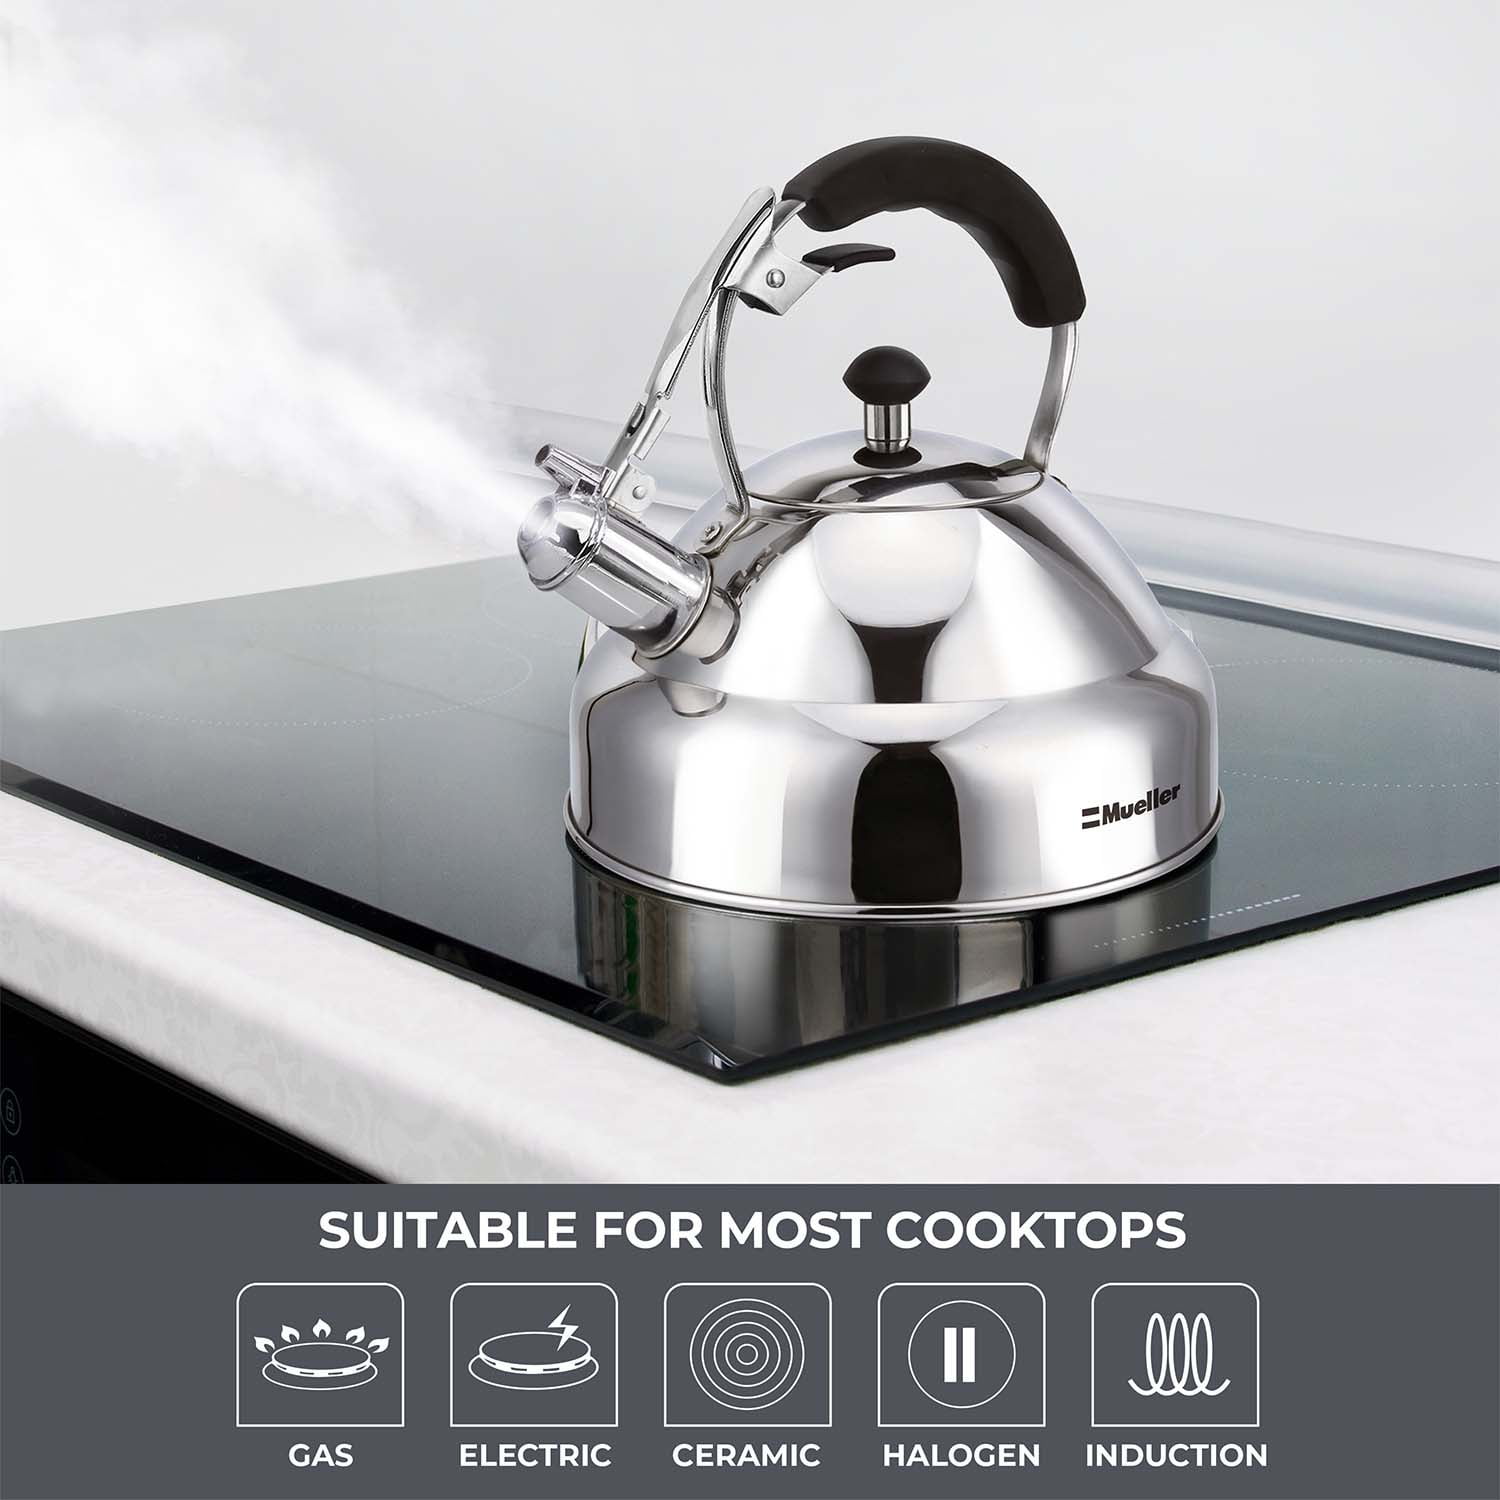 Cook Pro 3 Quarts Stainless Steel (18/8) Whistling Stovetop Tea